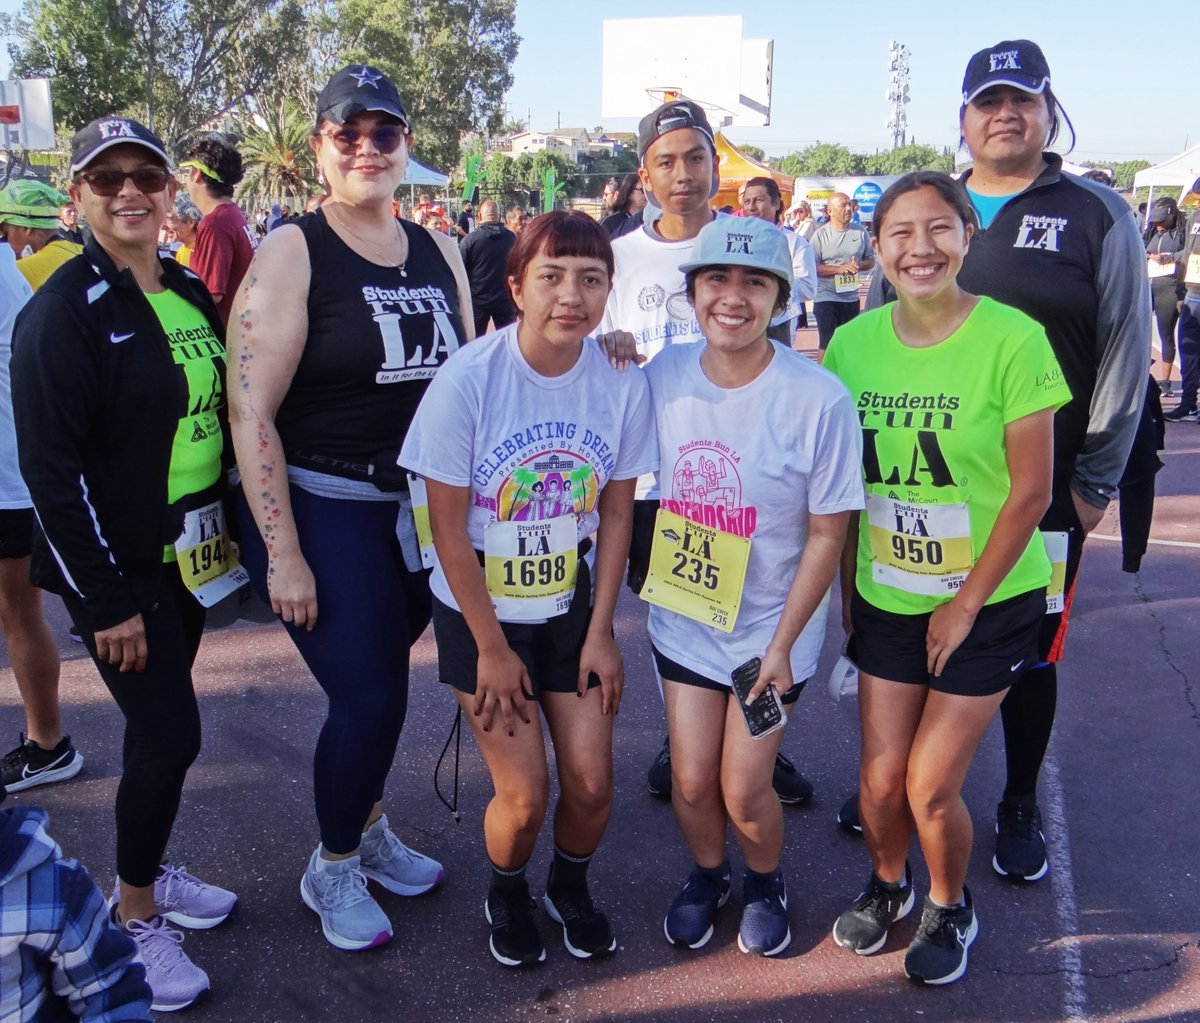 Don't Miss Out ☀️ The SRLA Spring into Summer 5K is your chance to celebrate an amazing season with SRLA 🎉 The SRLA Spring into Summer 5K is on May 5th. Use the code SRLAFAMILY to save $5 on registration for any event in the SRLA Medal Series. bit.ly/2zf52Rr